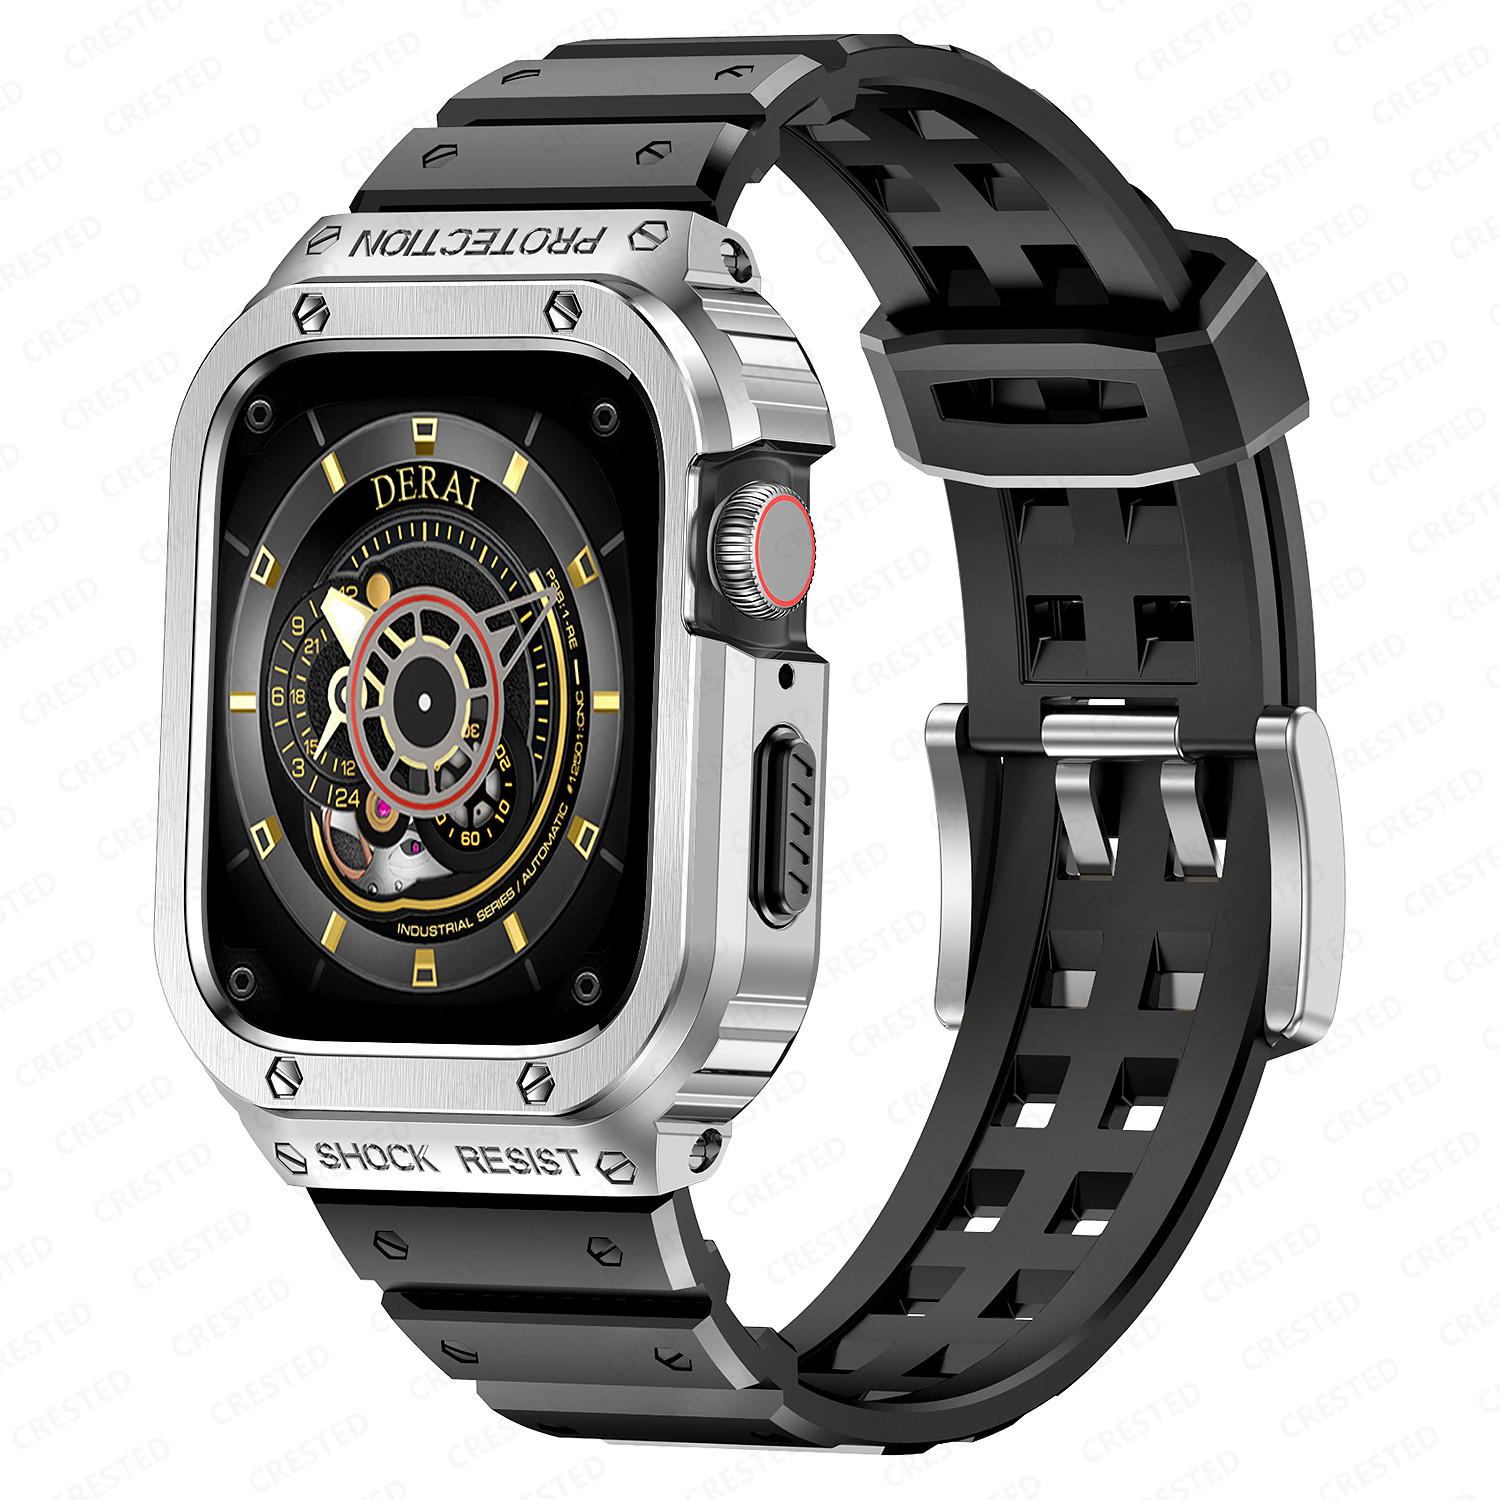 Silicone & Stainless Steel Band Alloy Case For Apple Watch